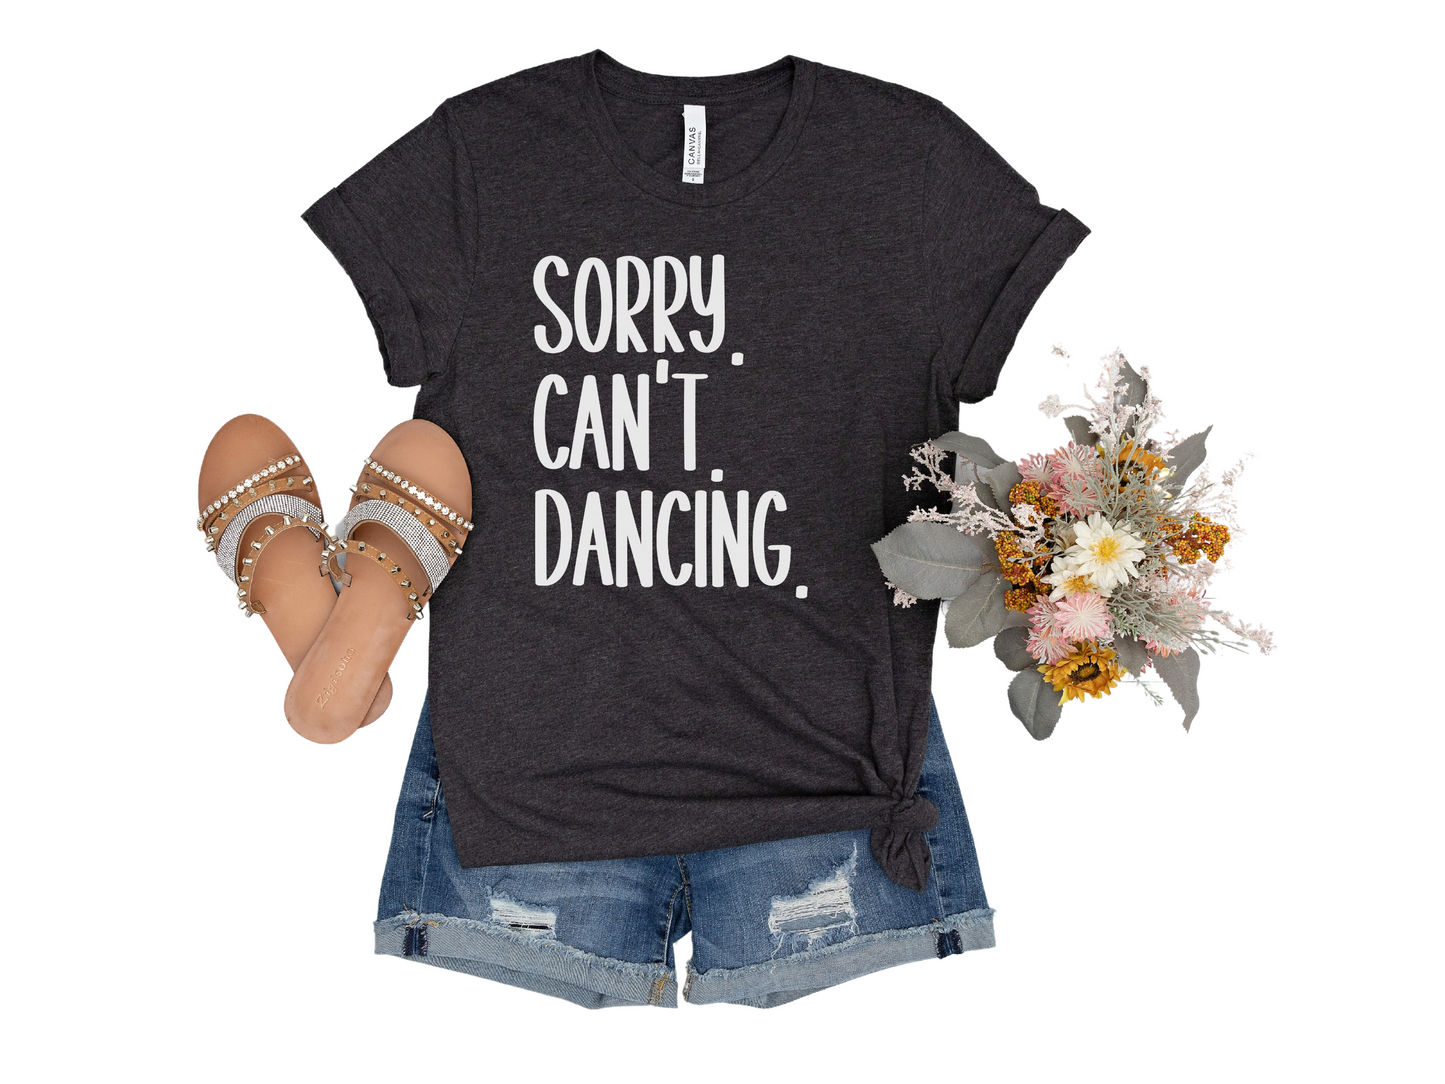 Sorry. Can't. Dancing.